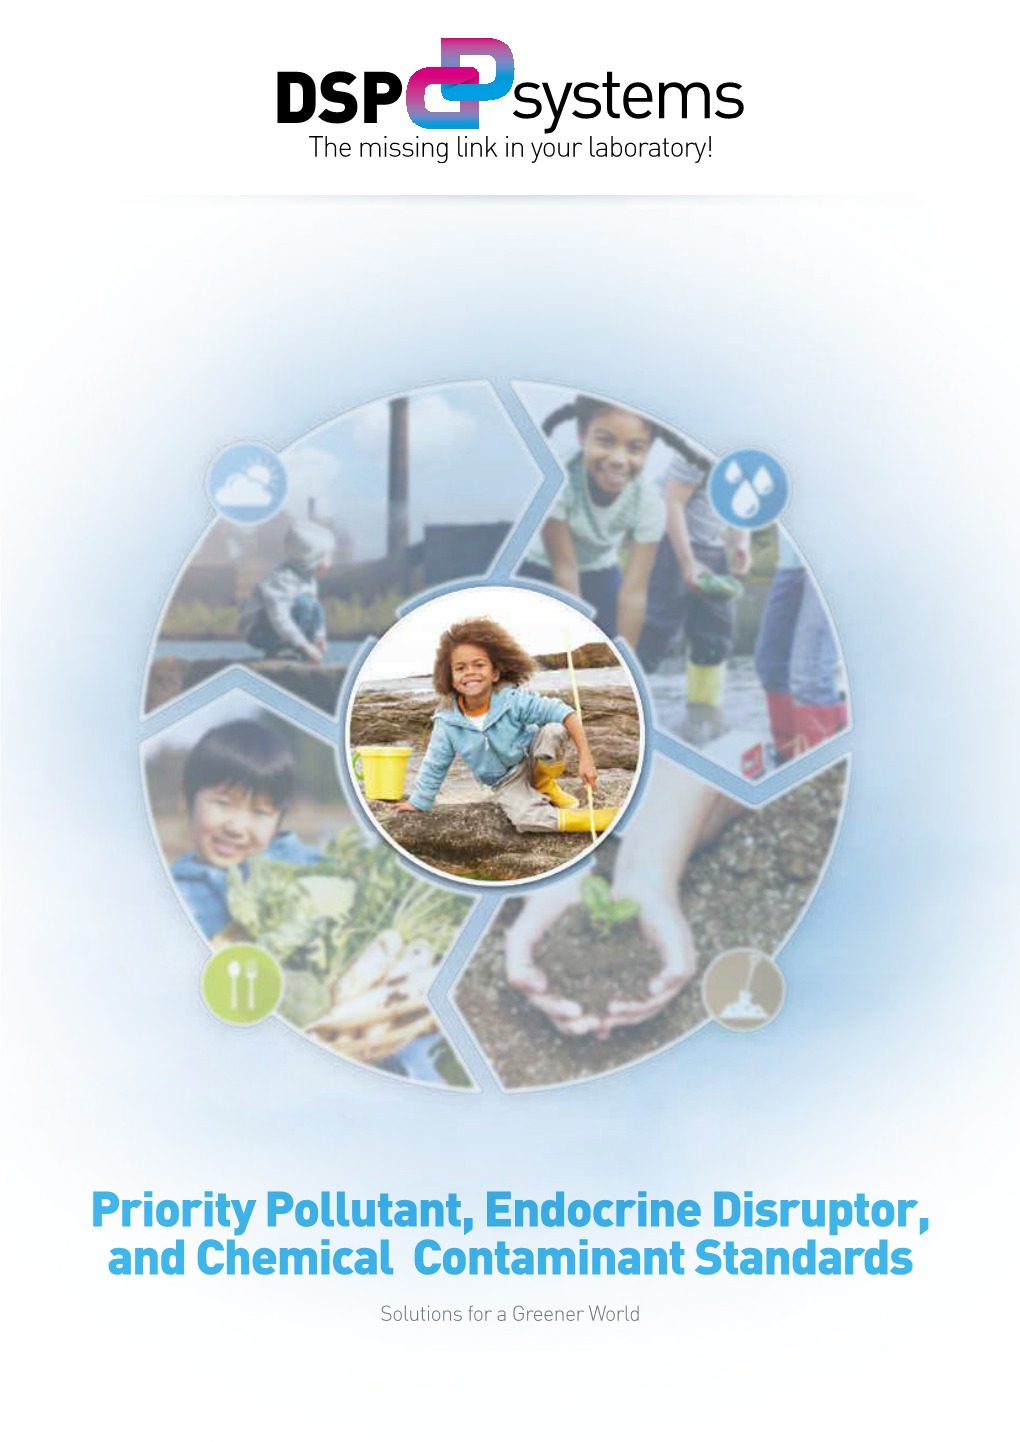 Priority Pollutant, Endocrine Disruptor, and Chemical Contaminant Standards Solutions for a Greener World Introduction